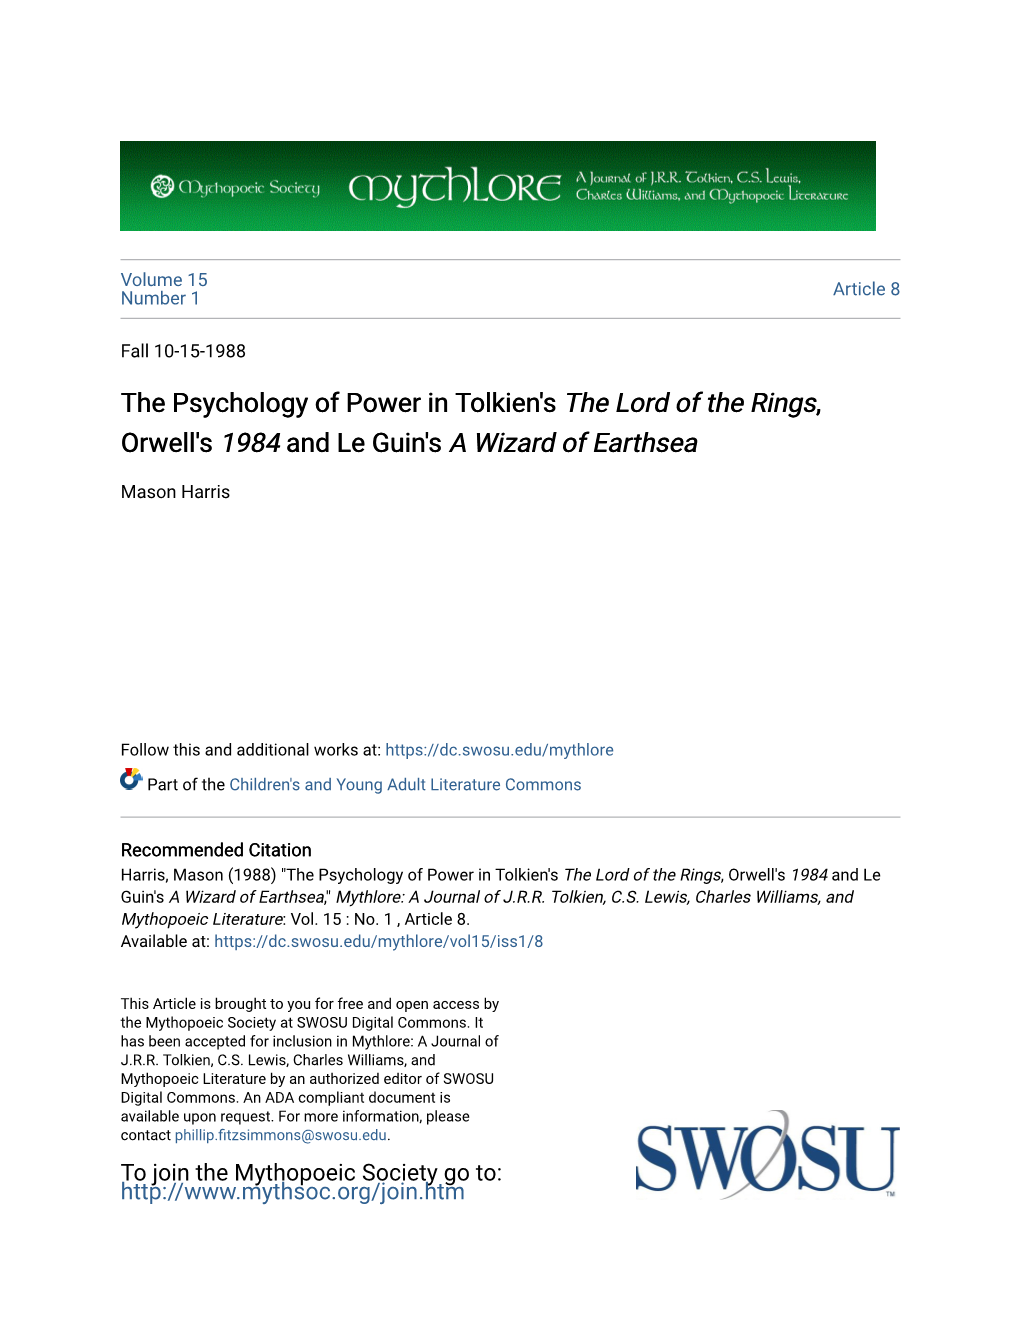 The Psychology of Power in Tolkien's the Lord of the Rings, Orwell's 1984 and Le Guin's a Wizard of Earthsea